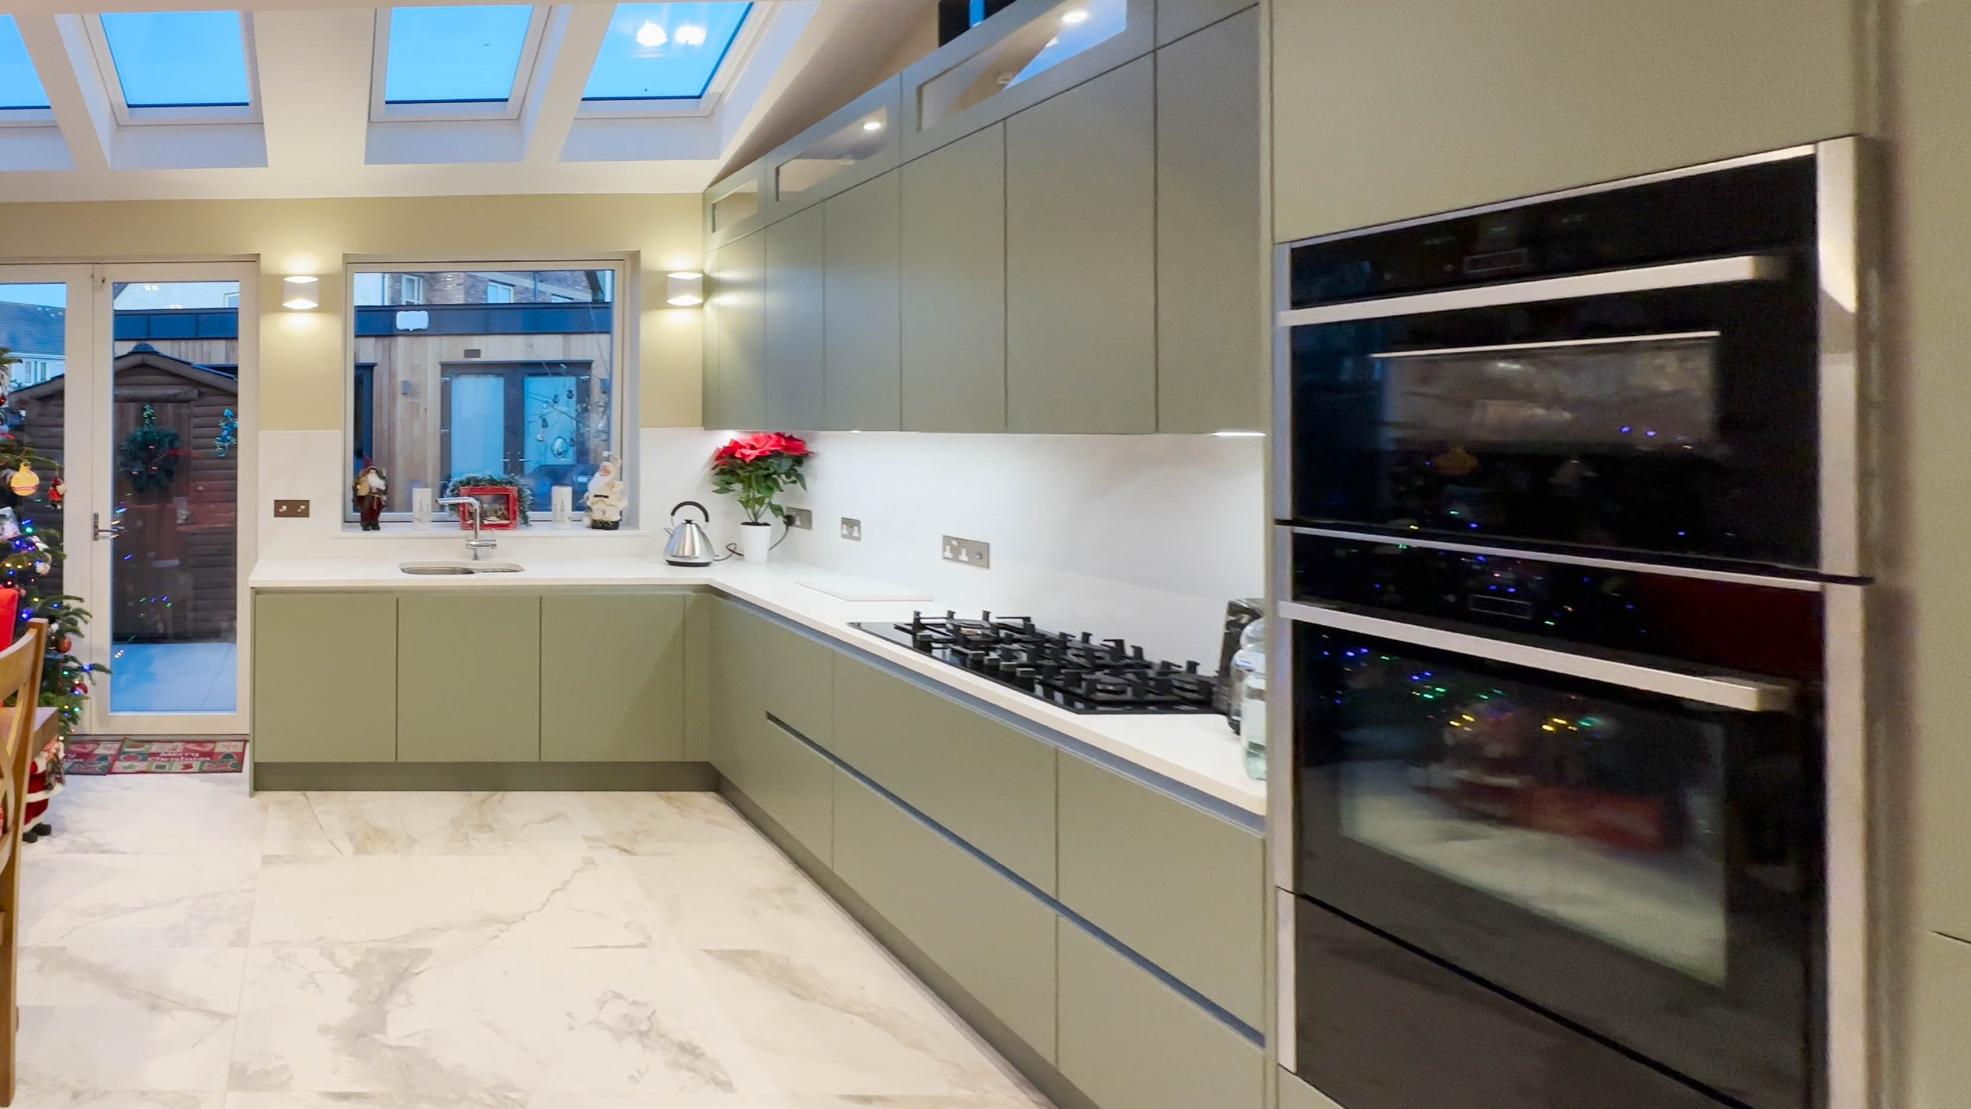 Transforming Spaces: The Journey of an Open Plan Kitchen Extension in Clonee